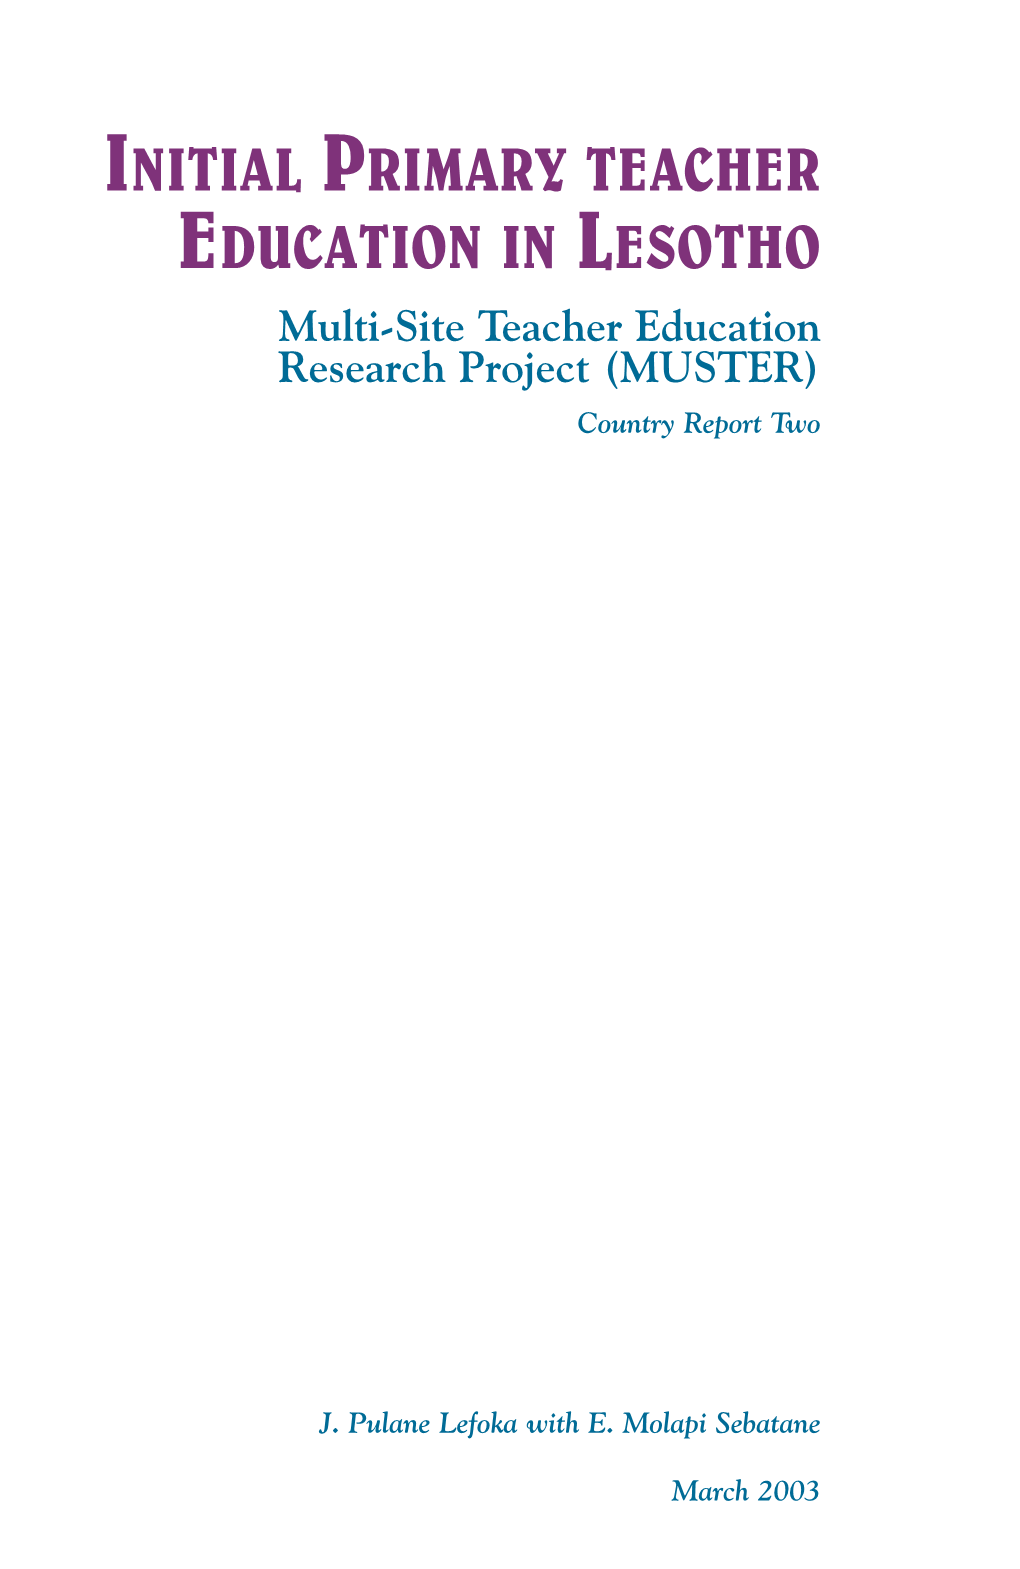 INITIAL PRIMARY TEACHER EDUCATION in LESOTHO Multi-Site Teacher Education Research Project (MUSTER) Country Report Two